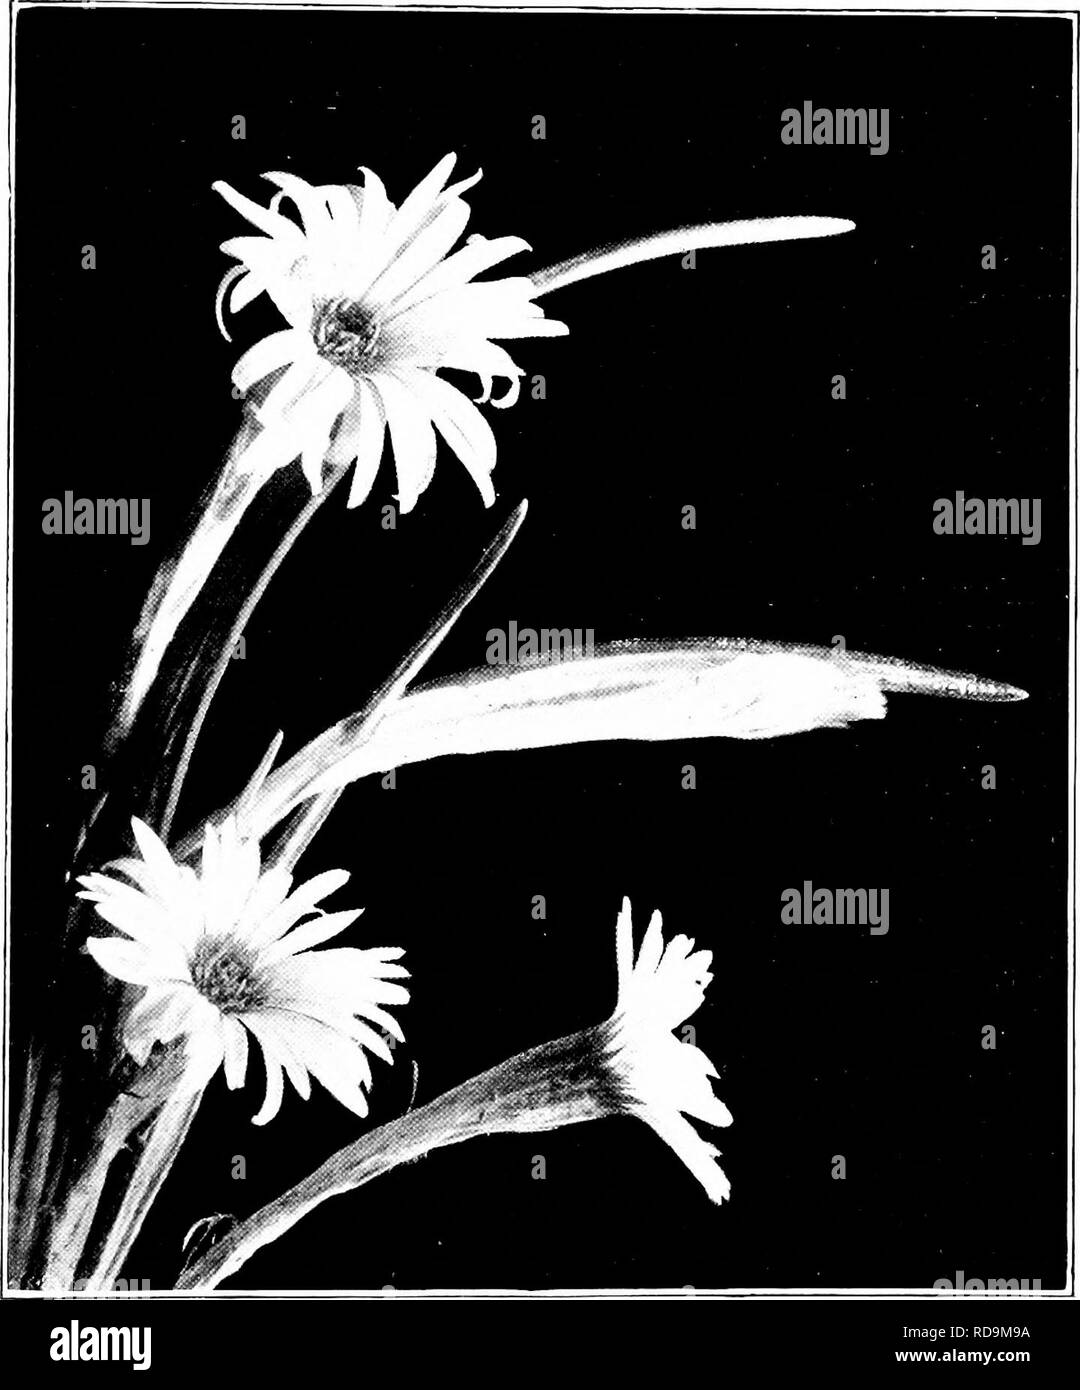 . Plants of New Zealand . Botany. DAISY, DANDELION, AND THISTLE FAMILY i'Z'S Crt'tius Hdastia. Tufted, woolly shrul^s, forming dense masses, sometimes several feet across. This genus differs from Raoulia in having tailless anthers. Flower-heads large, solitary, snnk amongst the upper leaves. Ray-llorets female. Disk-florets. Fig. 1-ifi. C'eliiiisi;! longifnlia, var. i:,' nat. size). numerous. Achene shining, narrow, sometimes ril)bed. Pappus-hairs rigid, white. (Name in honour of Sir .lulius von Haast). This genus is endemic in New Zealand, i sp.. Please note that these images are extracted fr Stock Photo